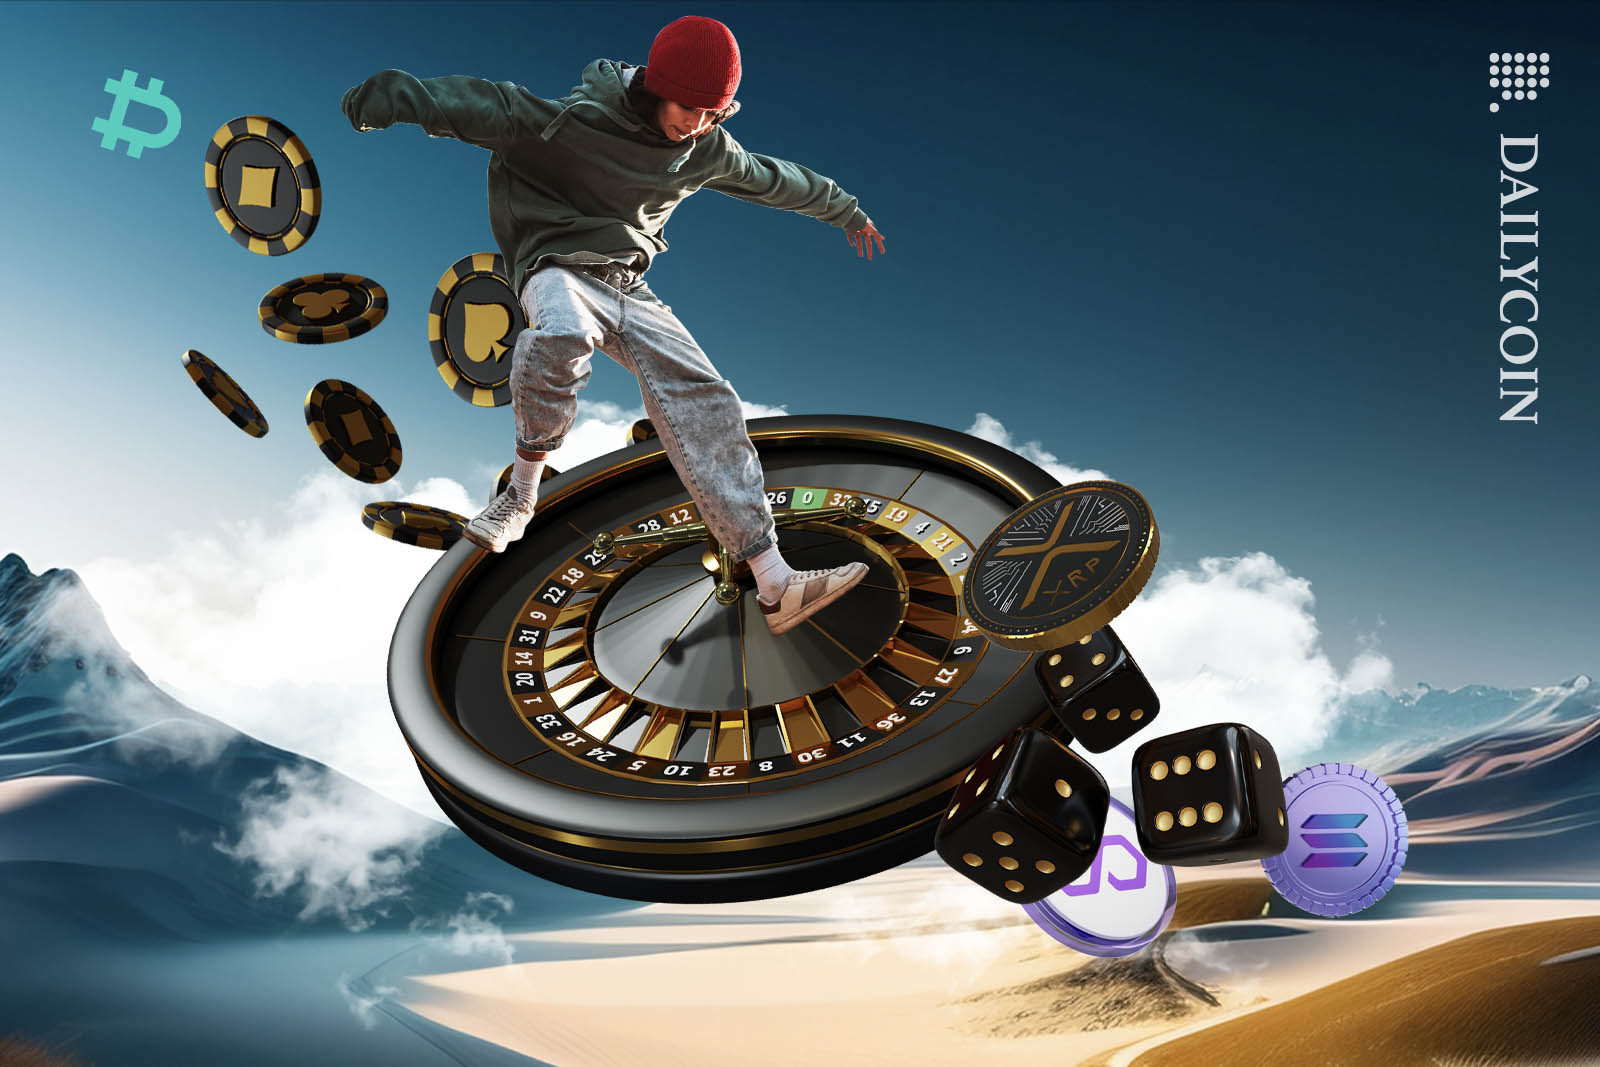 Kid skateboarding on a roulette wheel in the sky surrounded by casino chips and dices